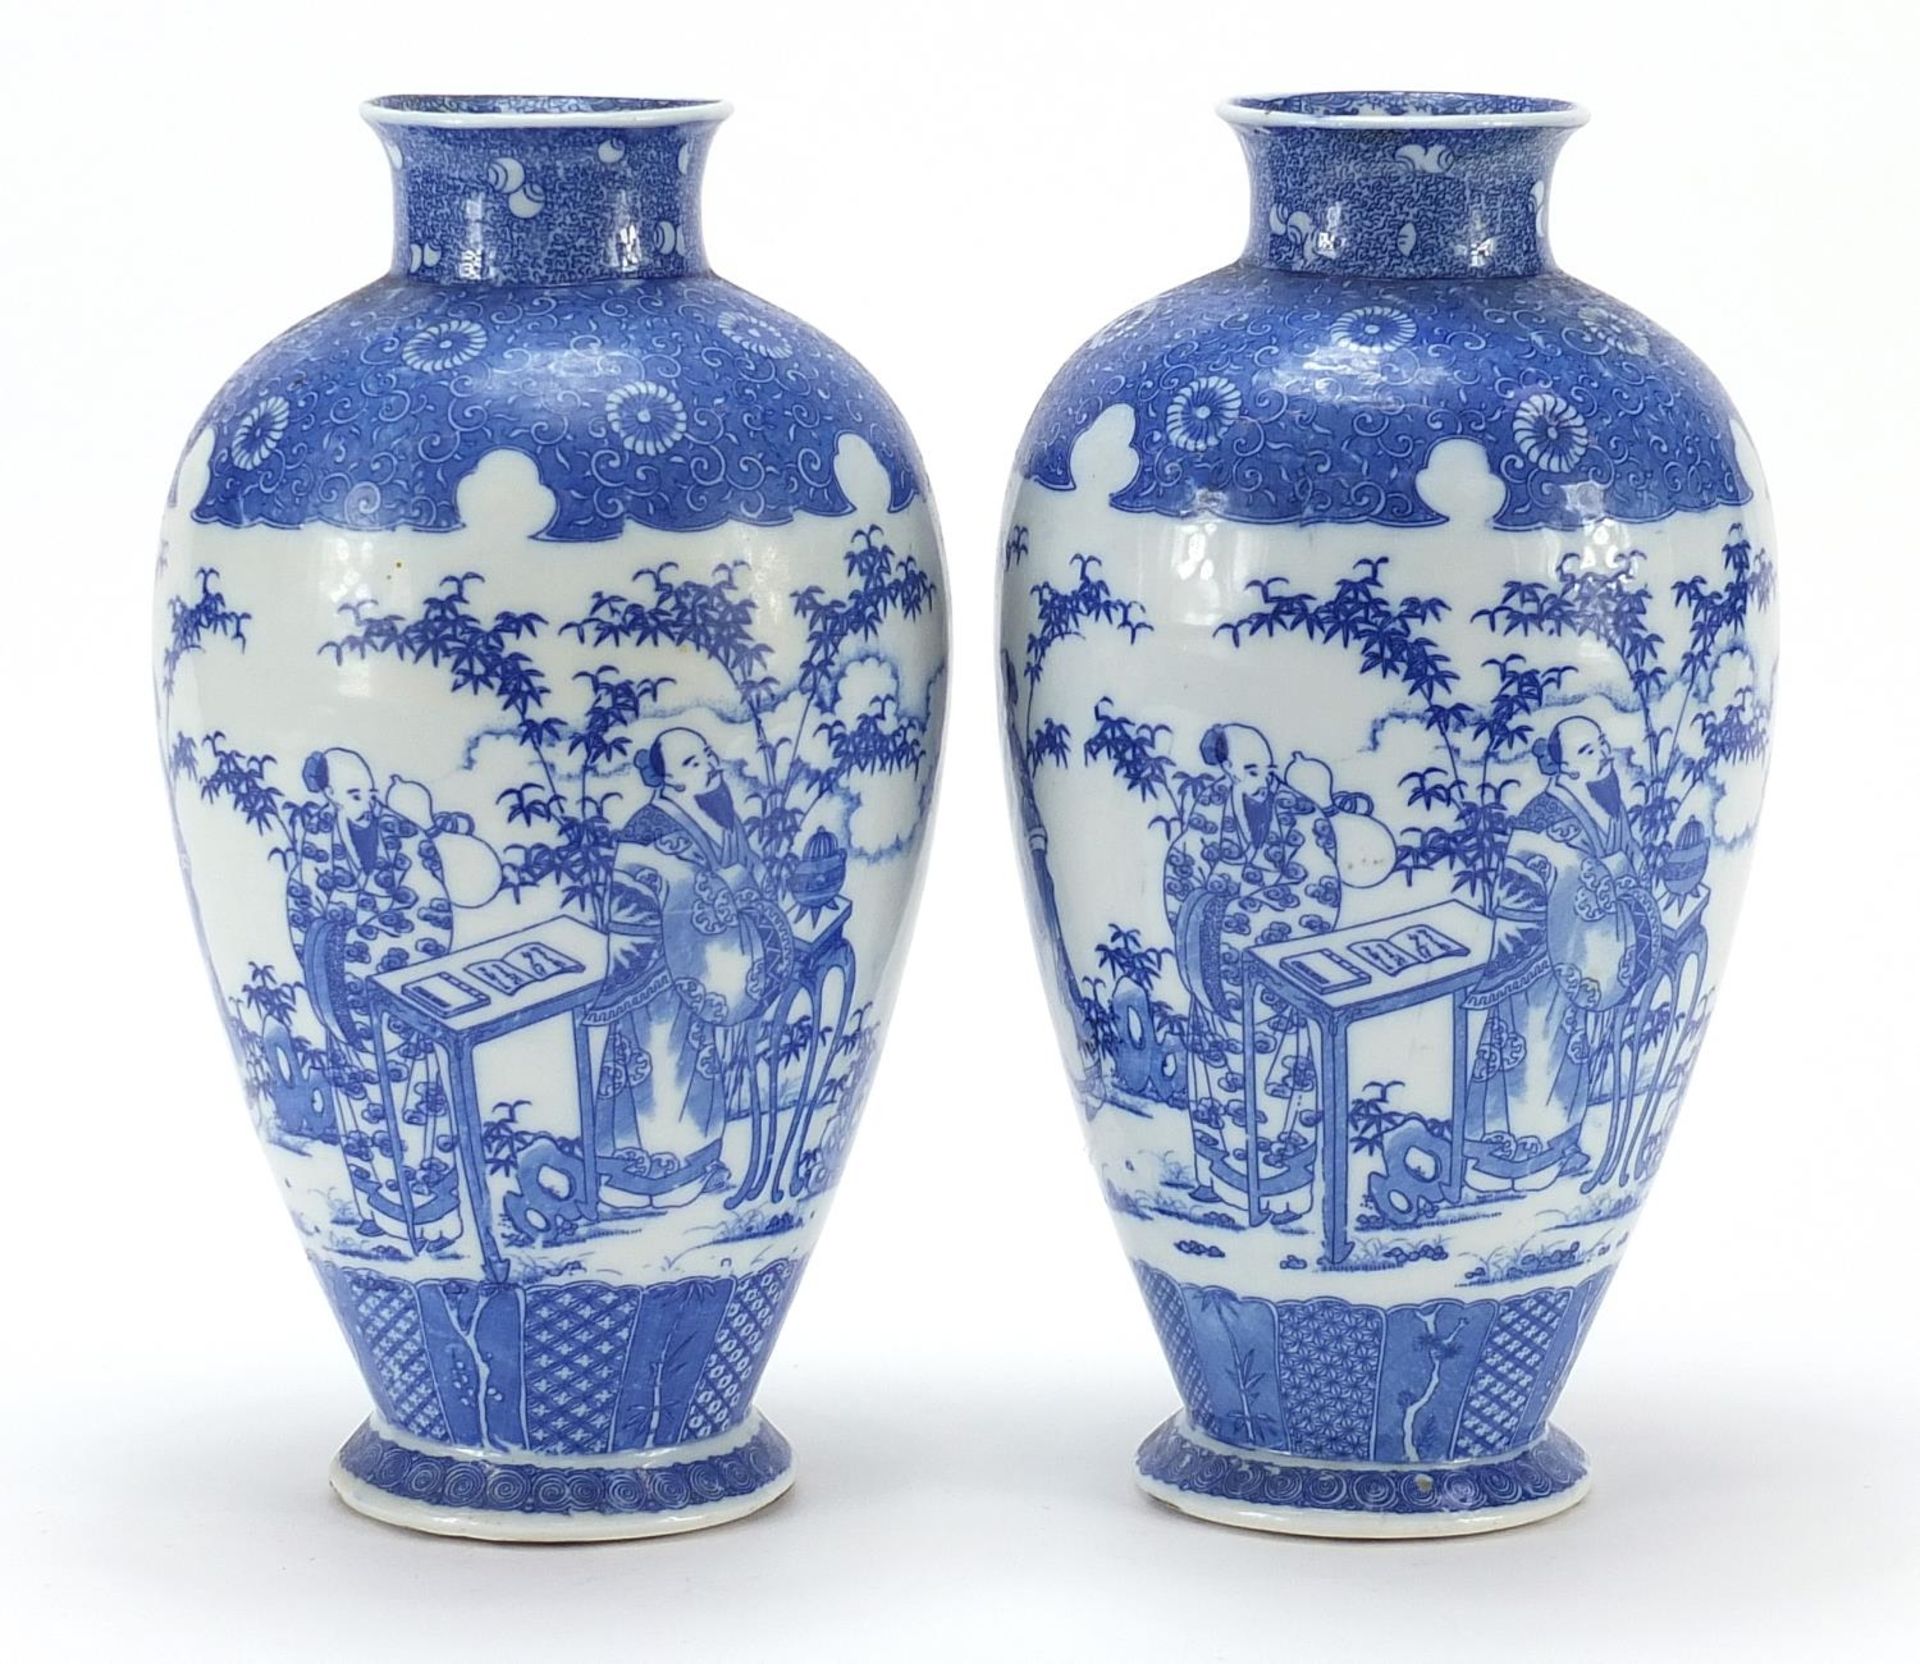 Pair of Japanese blue and white porcelain vases, each decorated with scholars in a landscape,